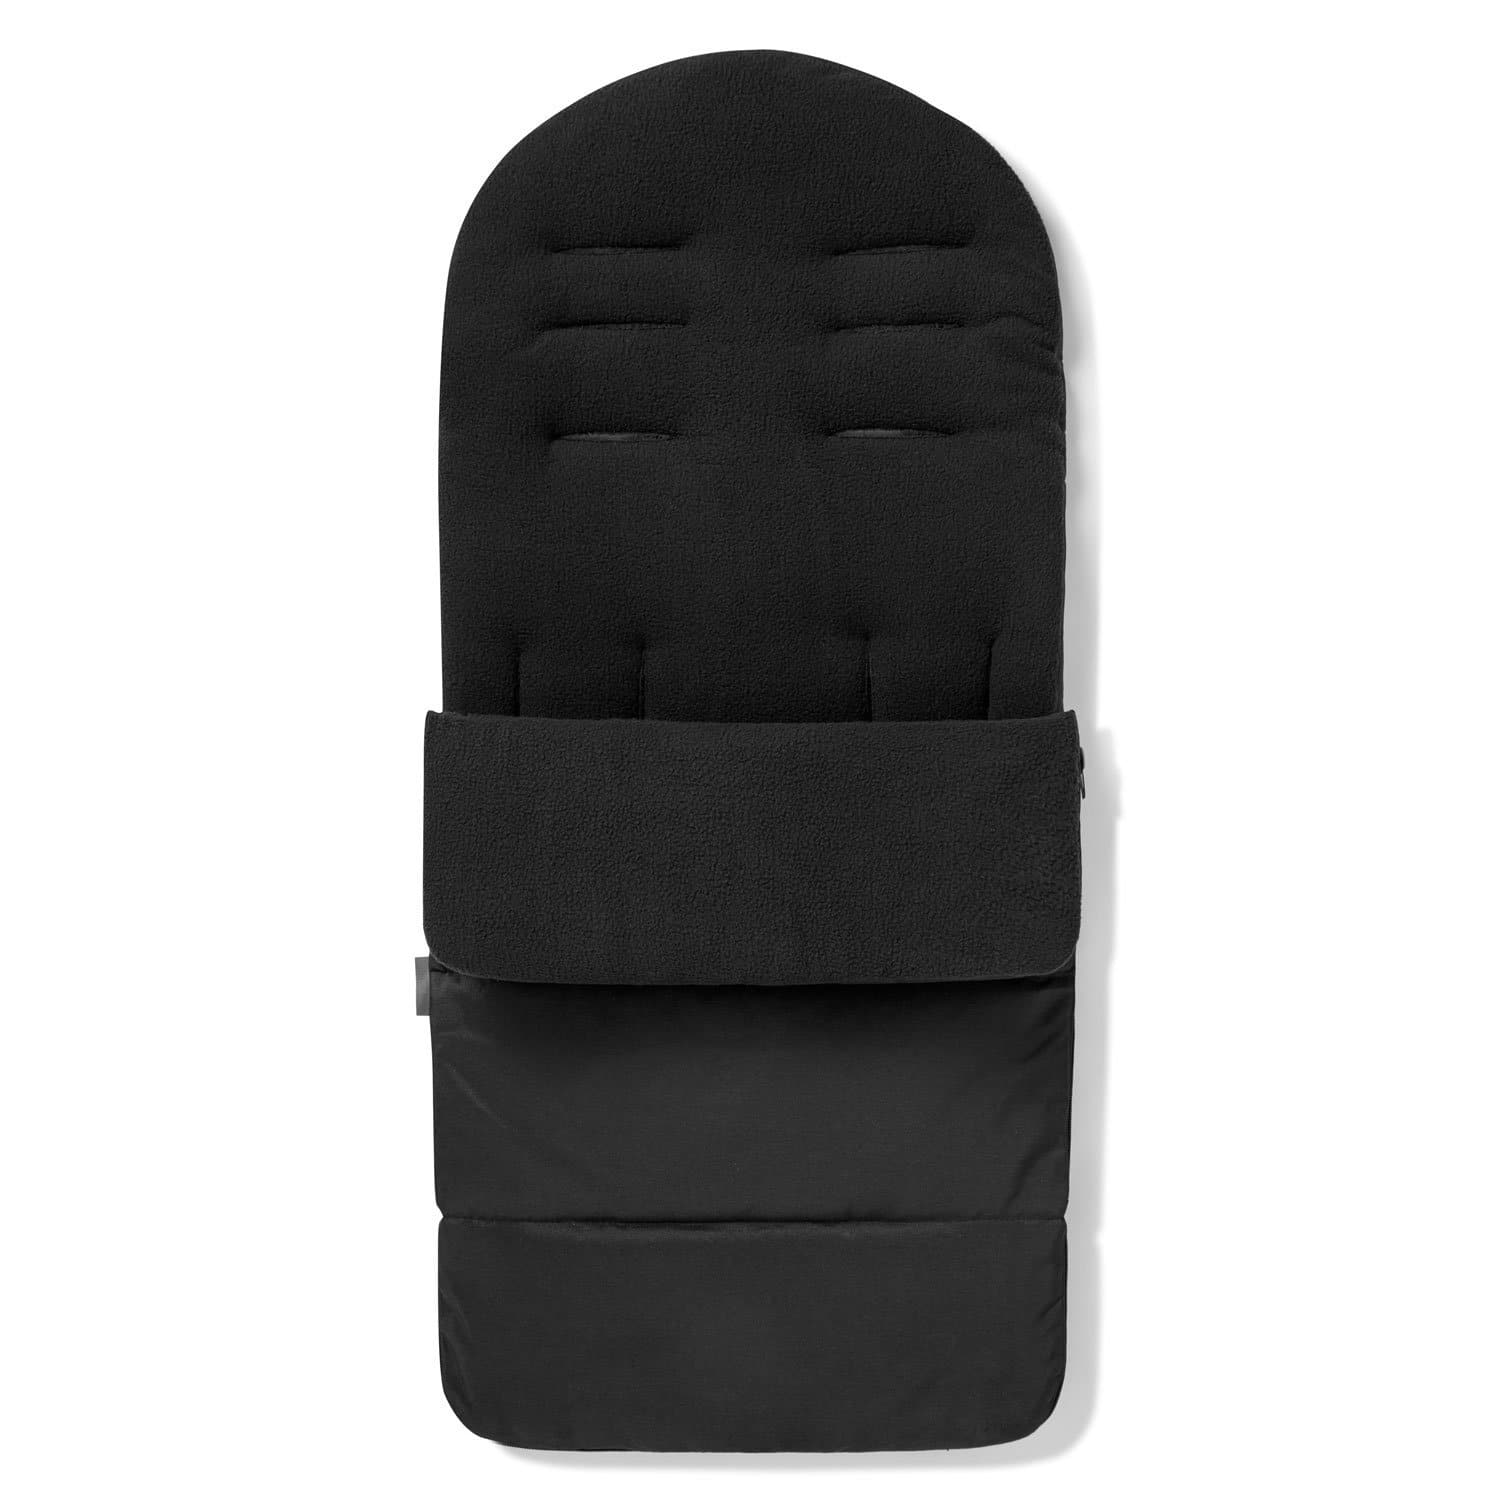 Premium Footmuff / Cosy Toes Compatible with Hauck - Black Jack / Fits All Models | For Your Little One